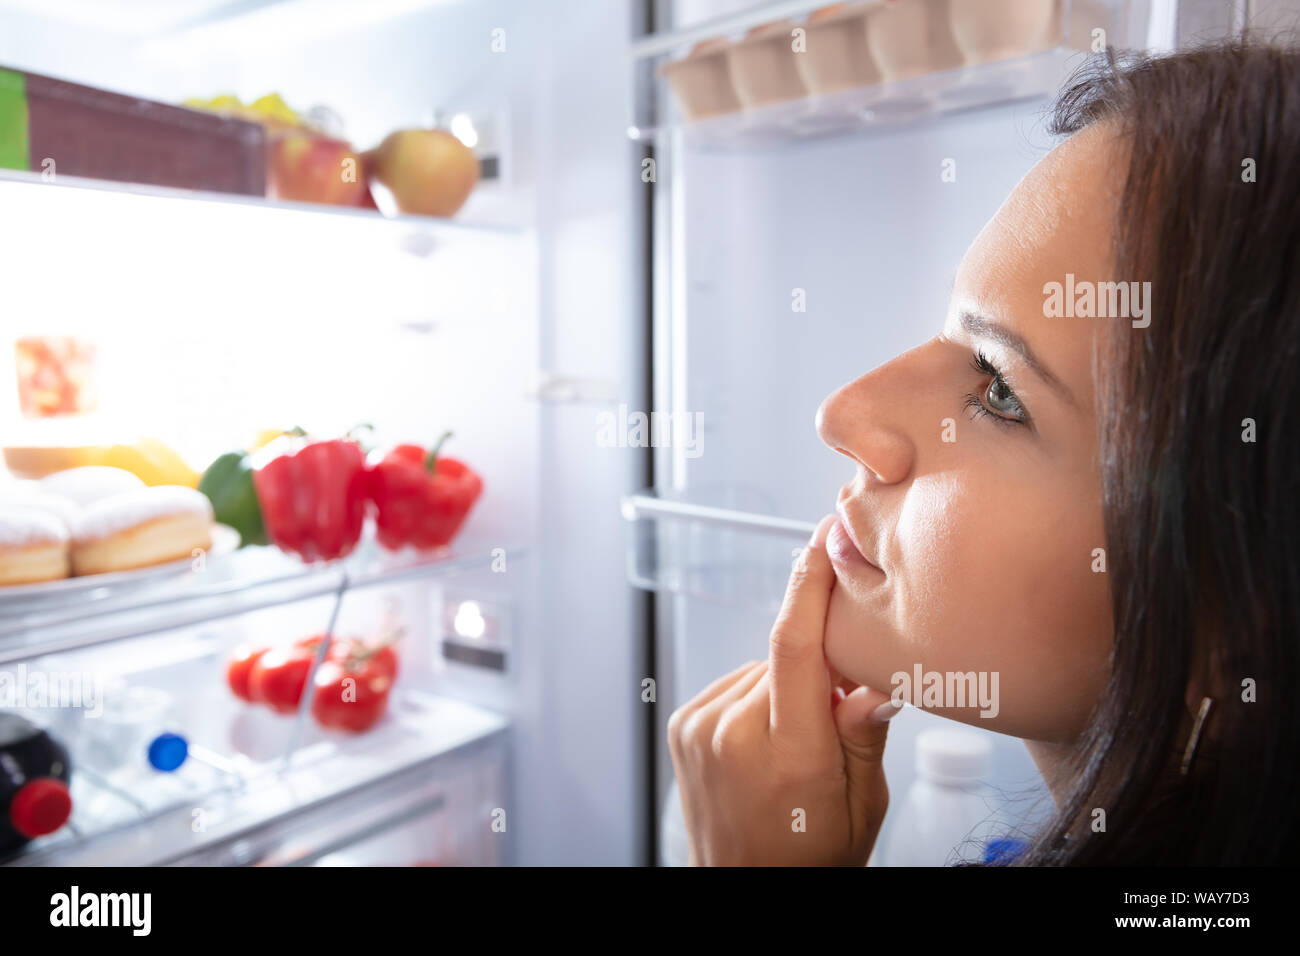 Pretty Woman Looking For Food In Refrigerator Stock Photo